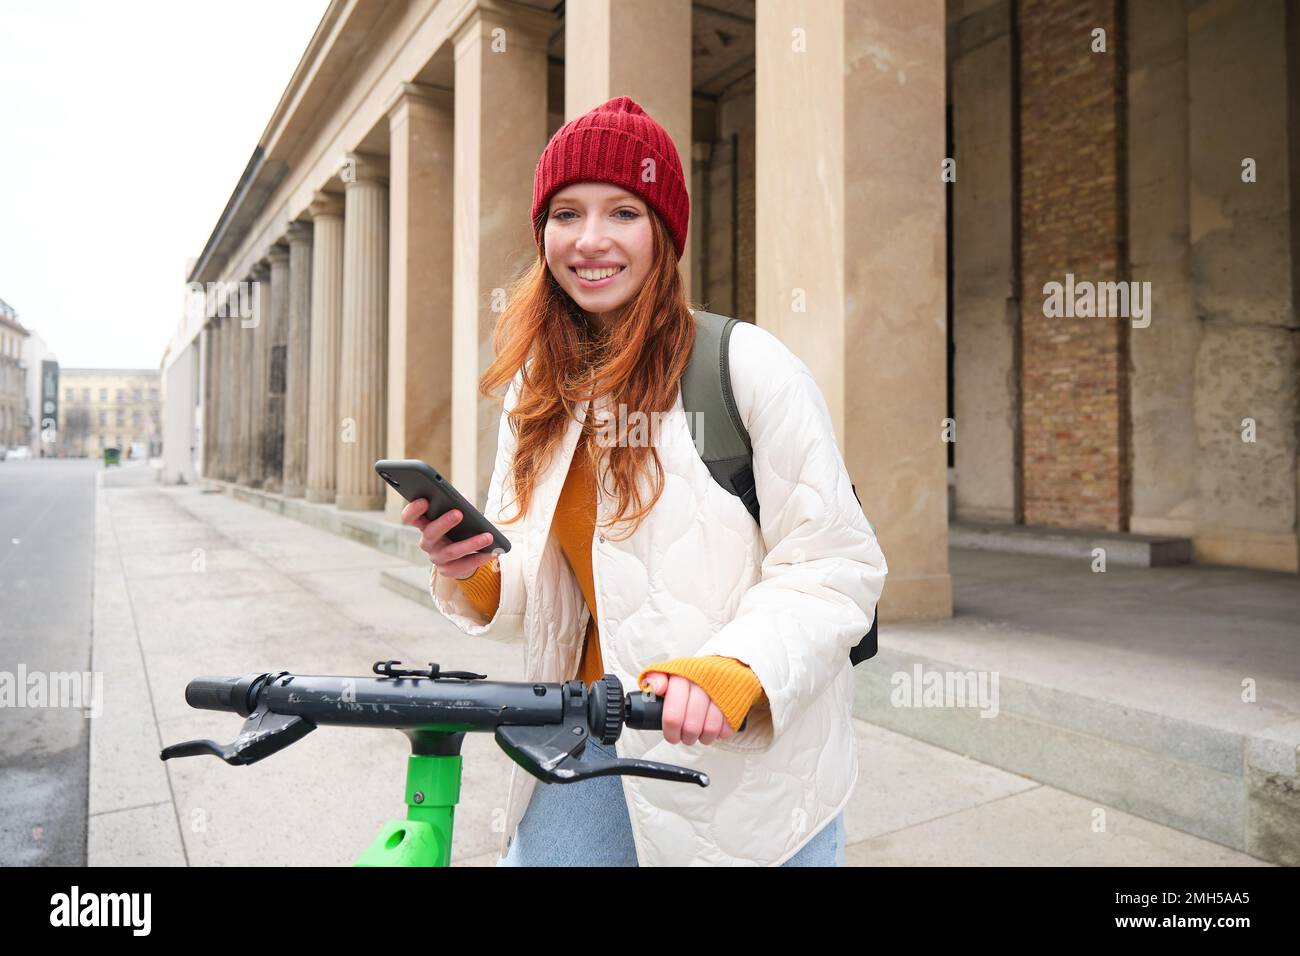 Beautiful young woman, tourist with backpack, rents e-scooter to travel around town, uses mobile phone application Stock Photo